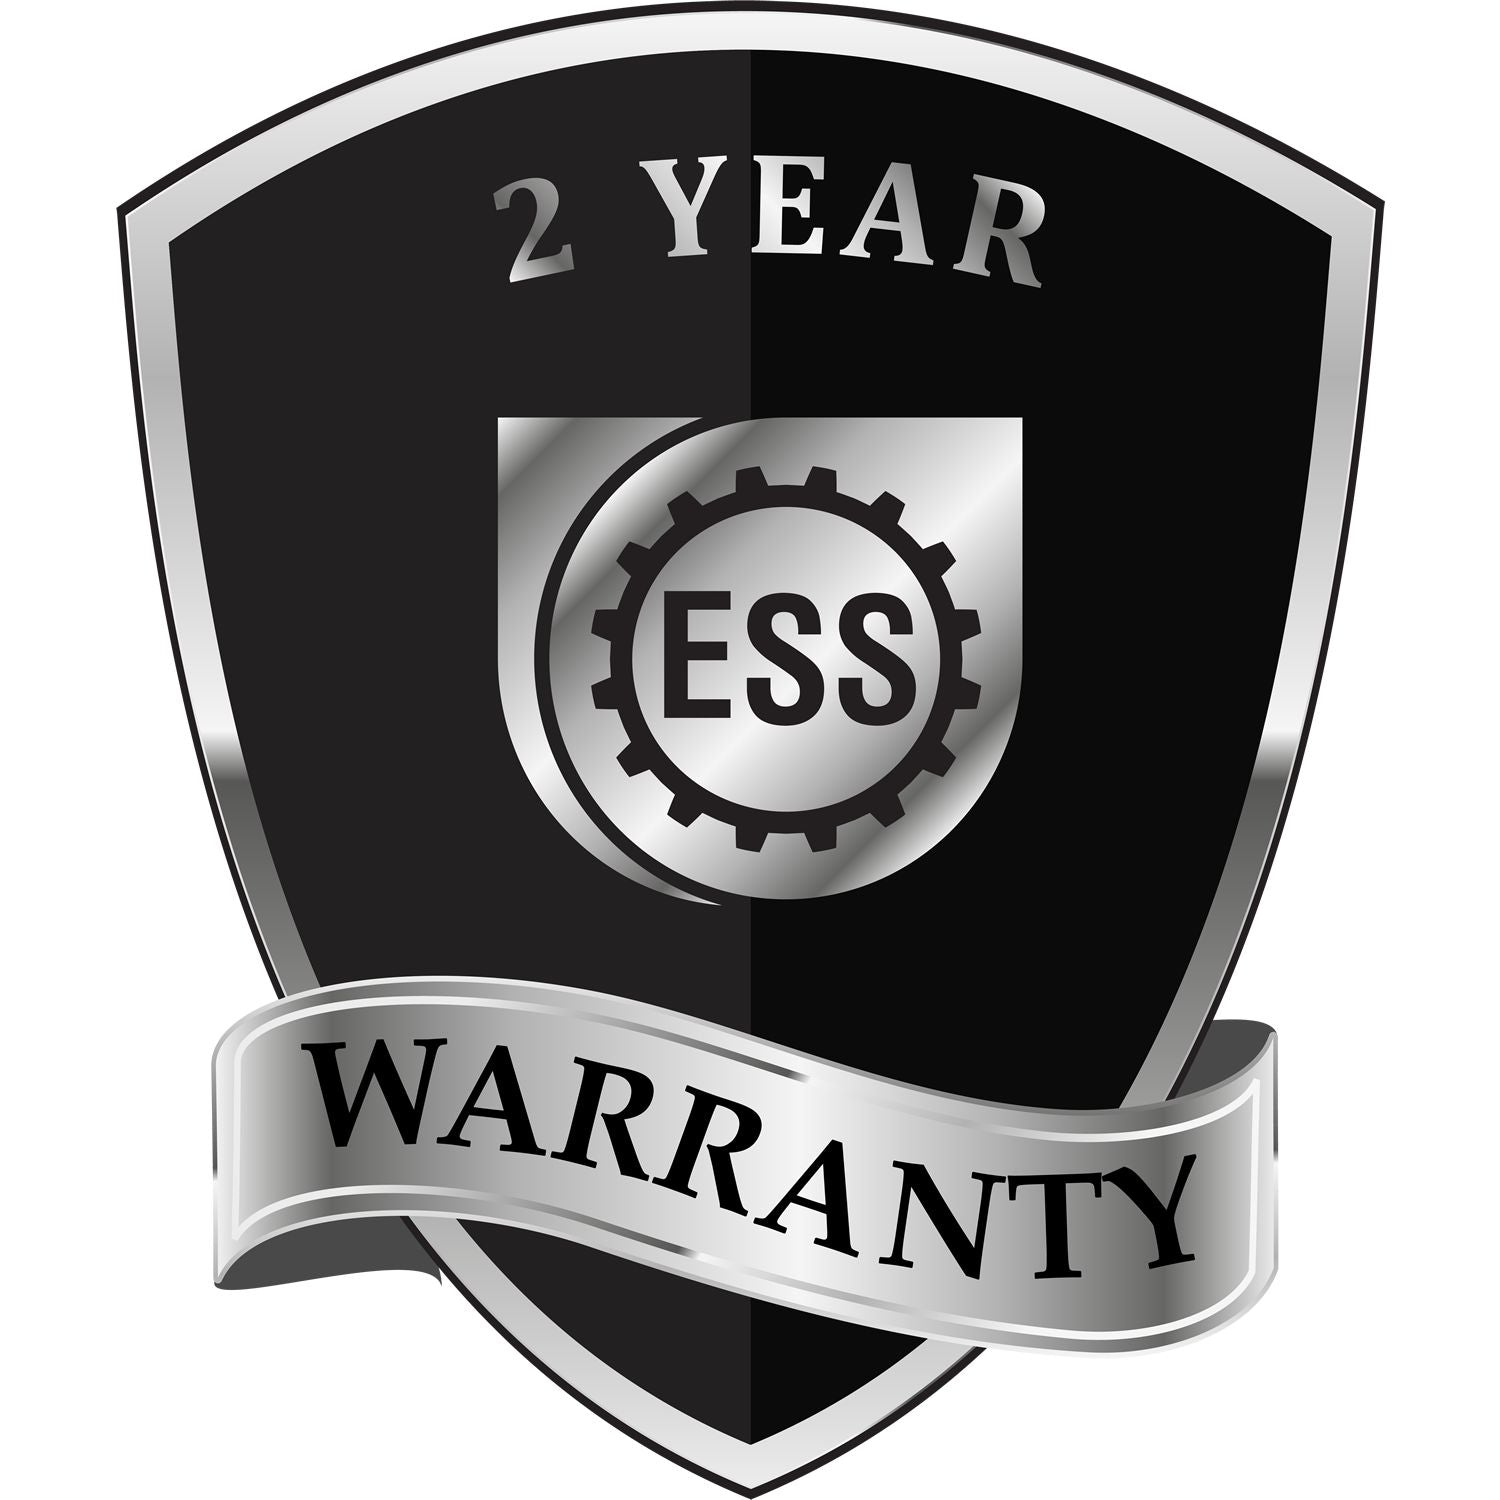 A badge or emblem showing a warranty icon for the Extended Long Reach New York Surveyor Embosser